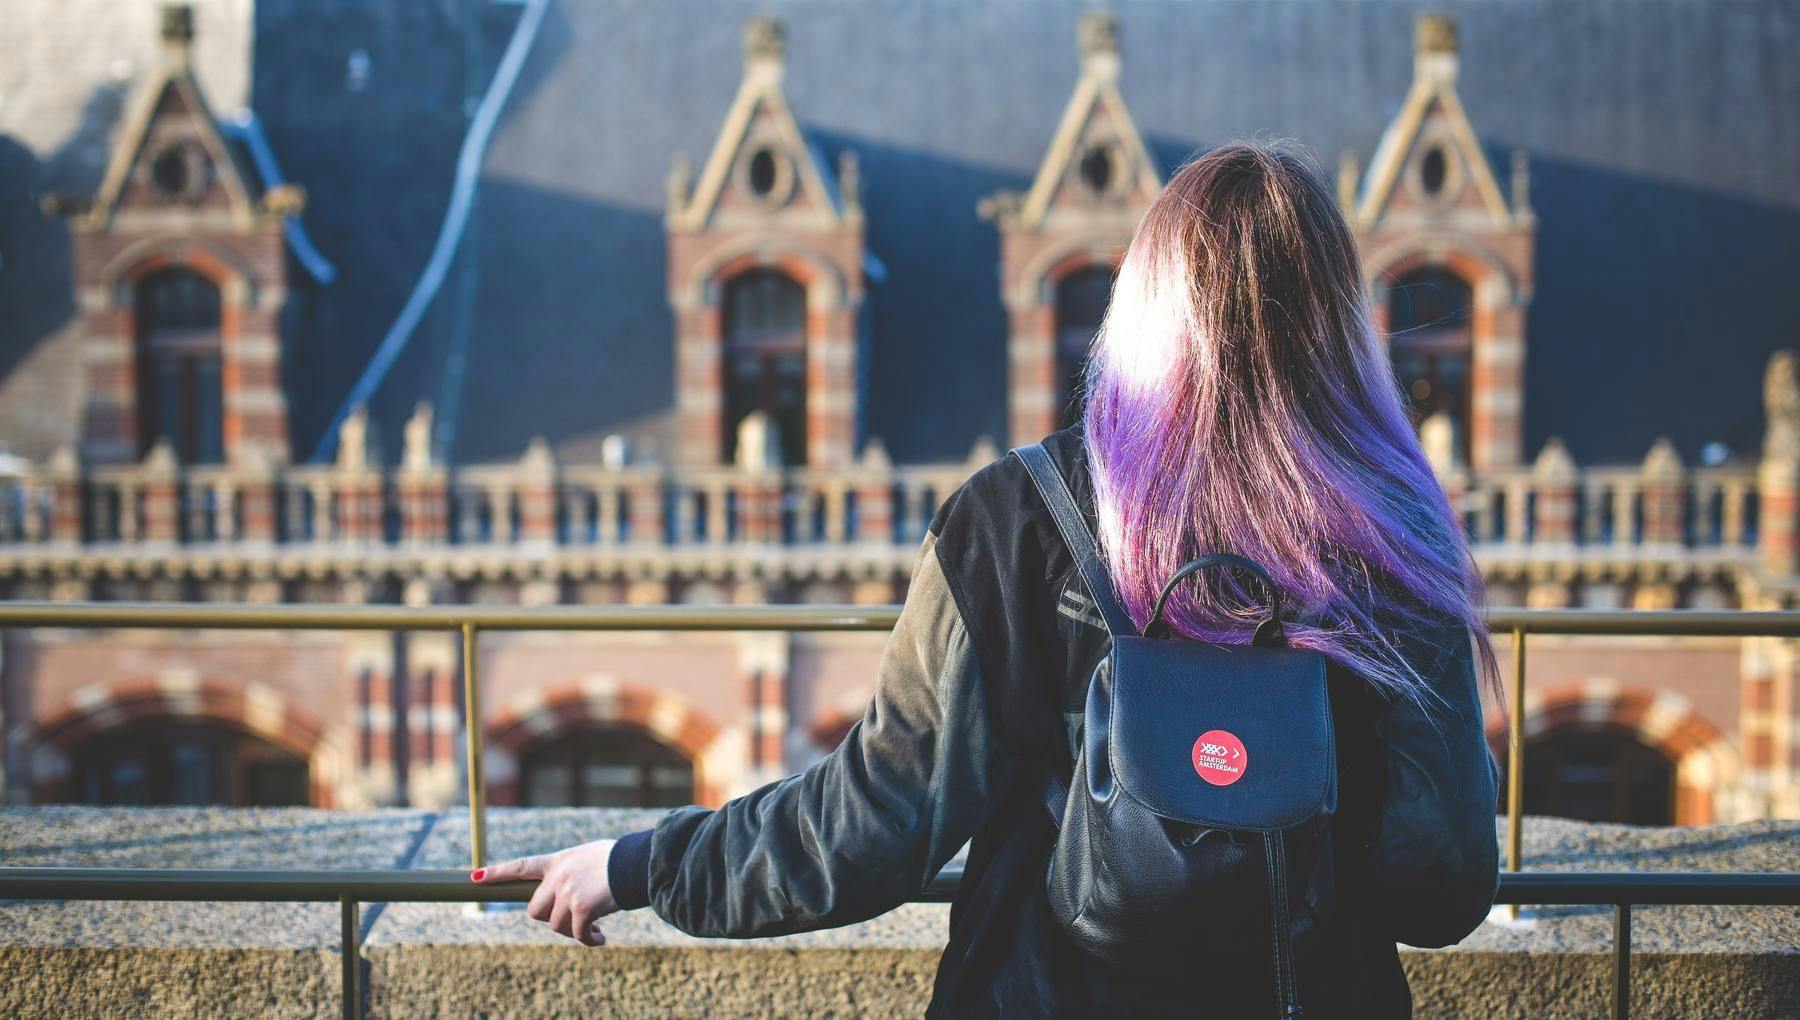 Woman standing on a rooftop with Startup sticker on bag.